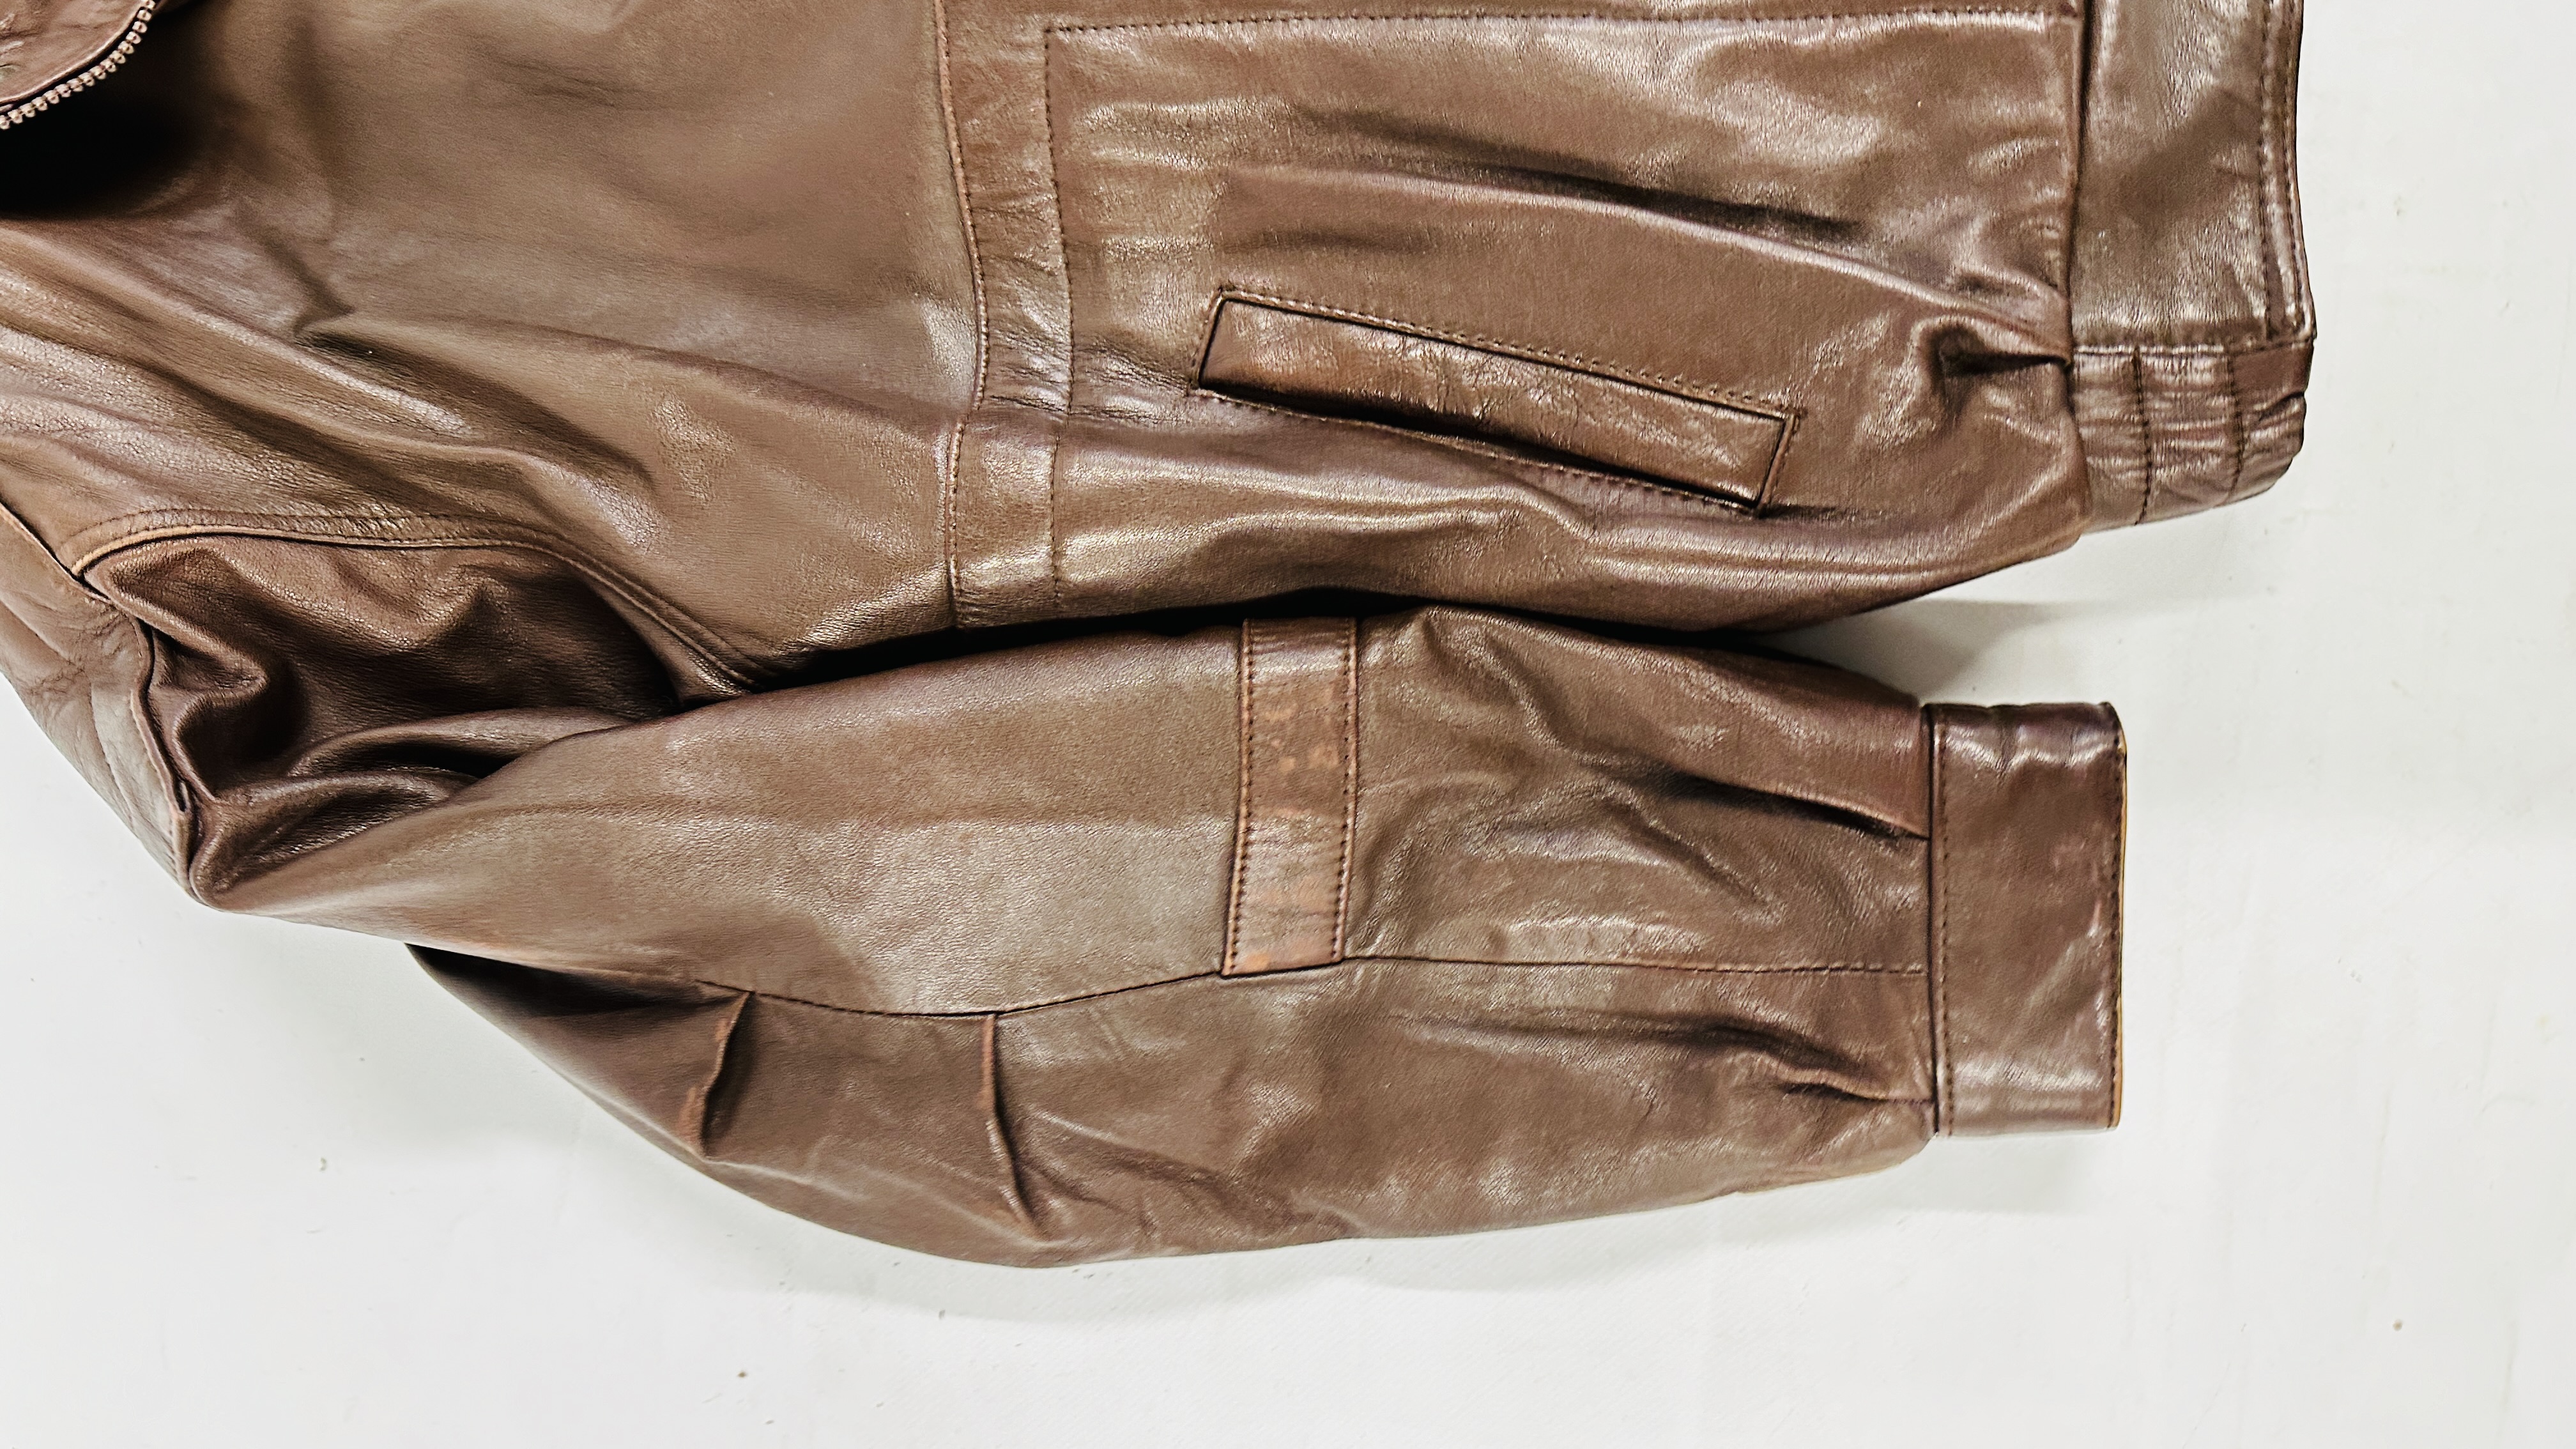 A GENTS BROWN LEATHER JACKET MARKED "SARDAR" SIZE L. - Image 6 of 9